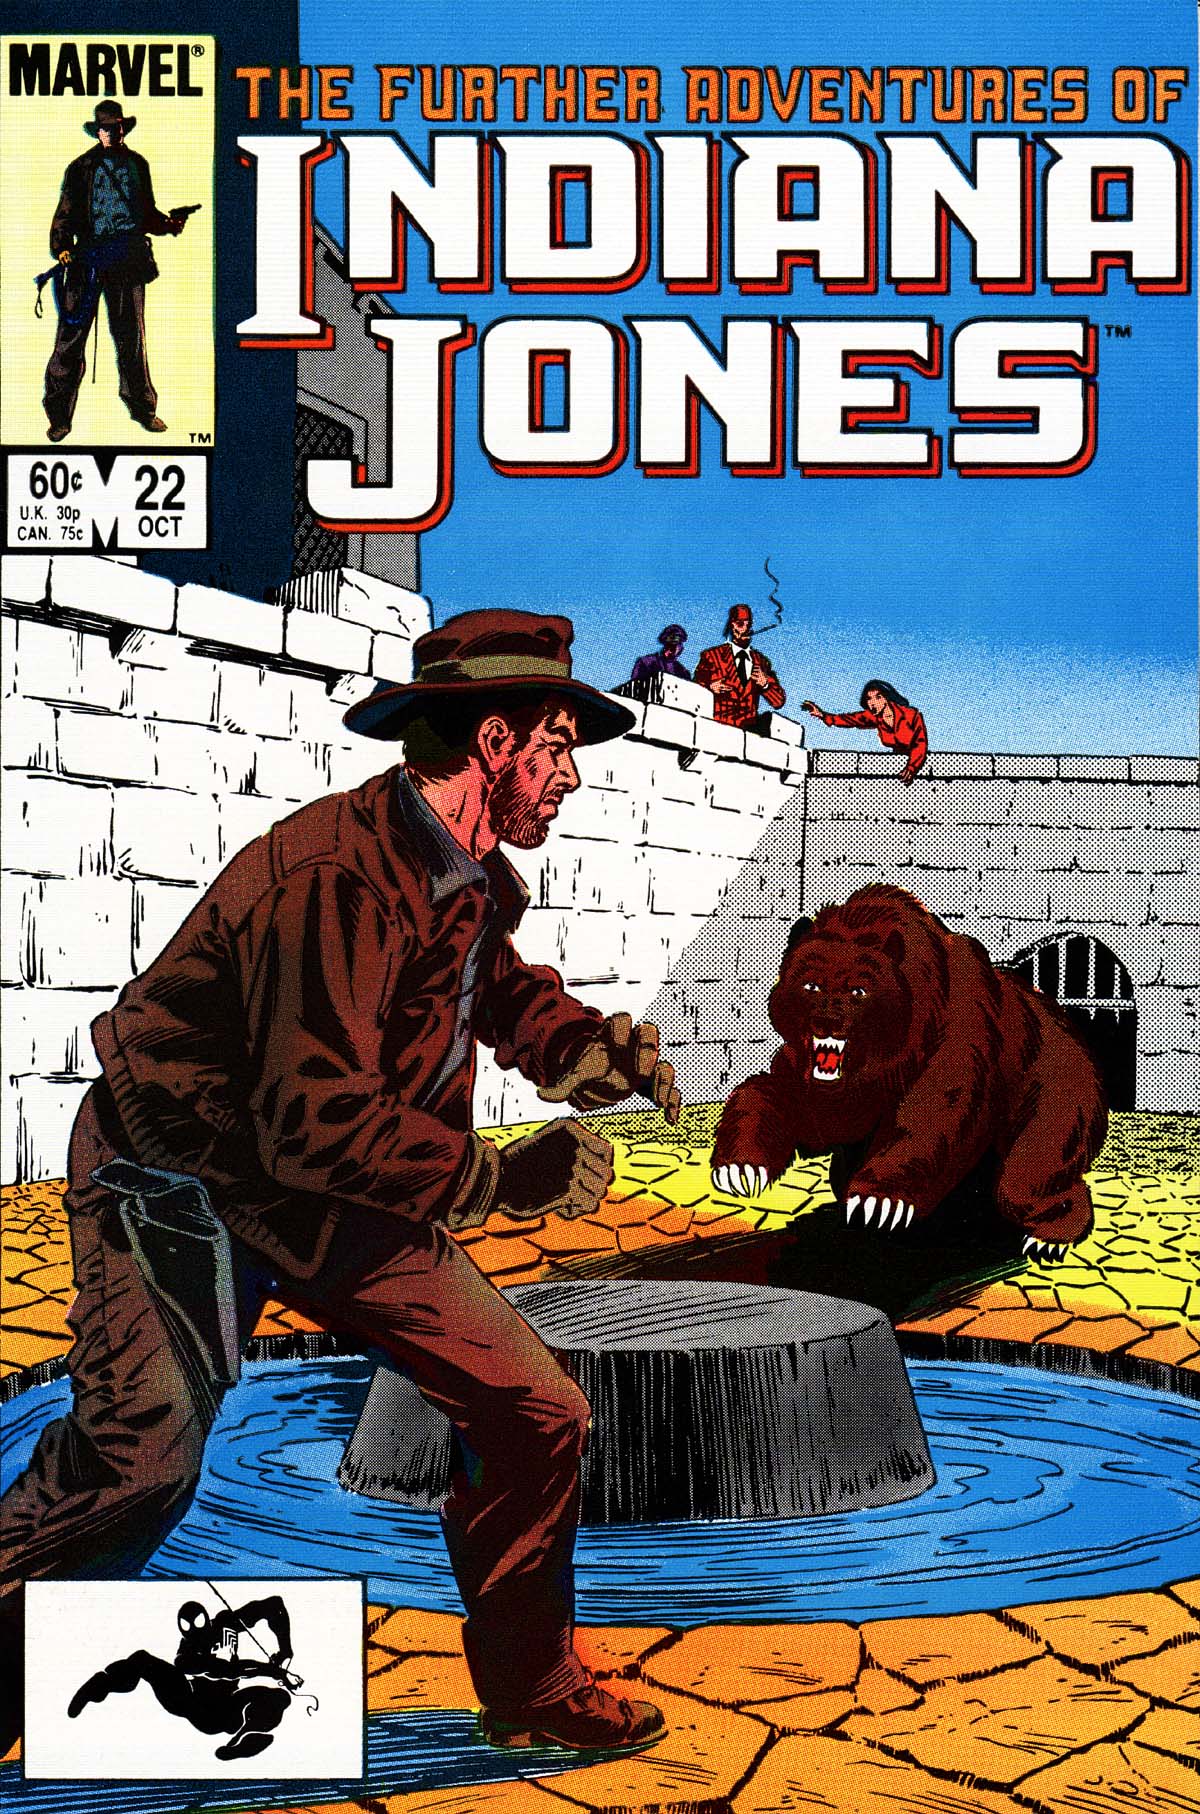 Read online The Further Adventures of Indiana Jones comic -  Issue #22 - 1